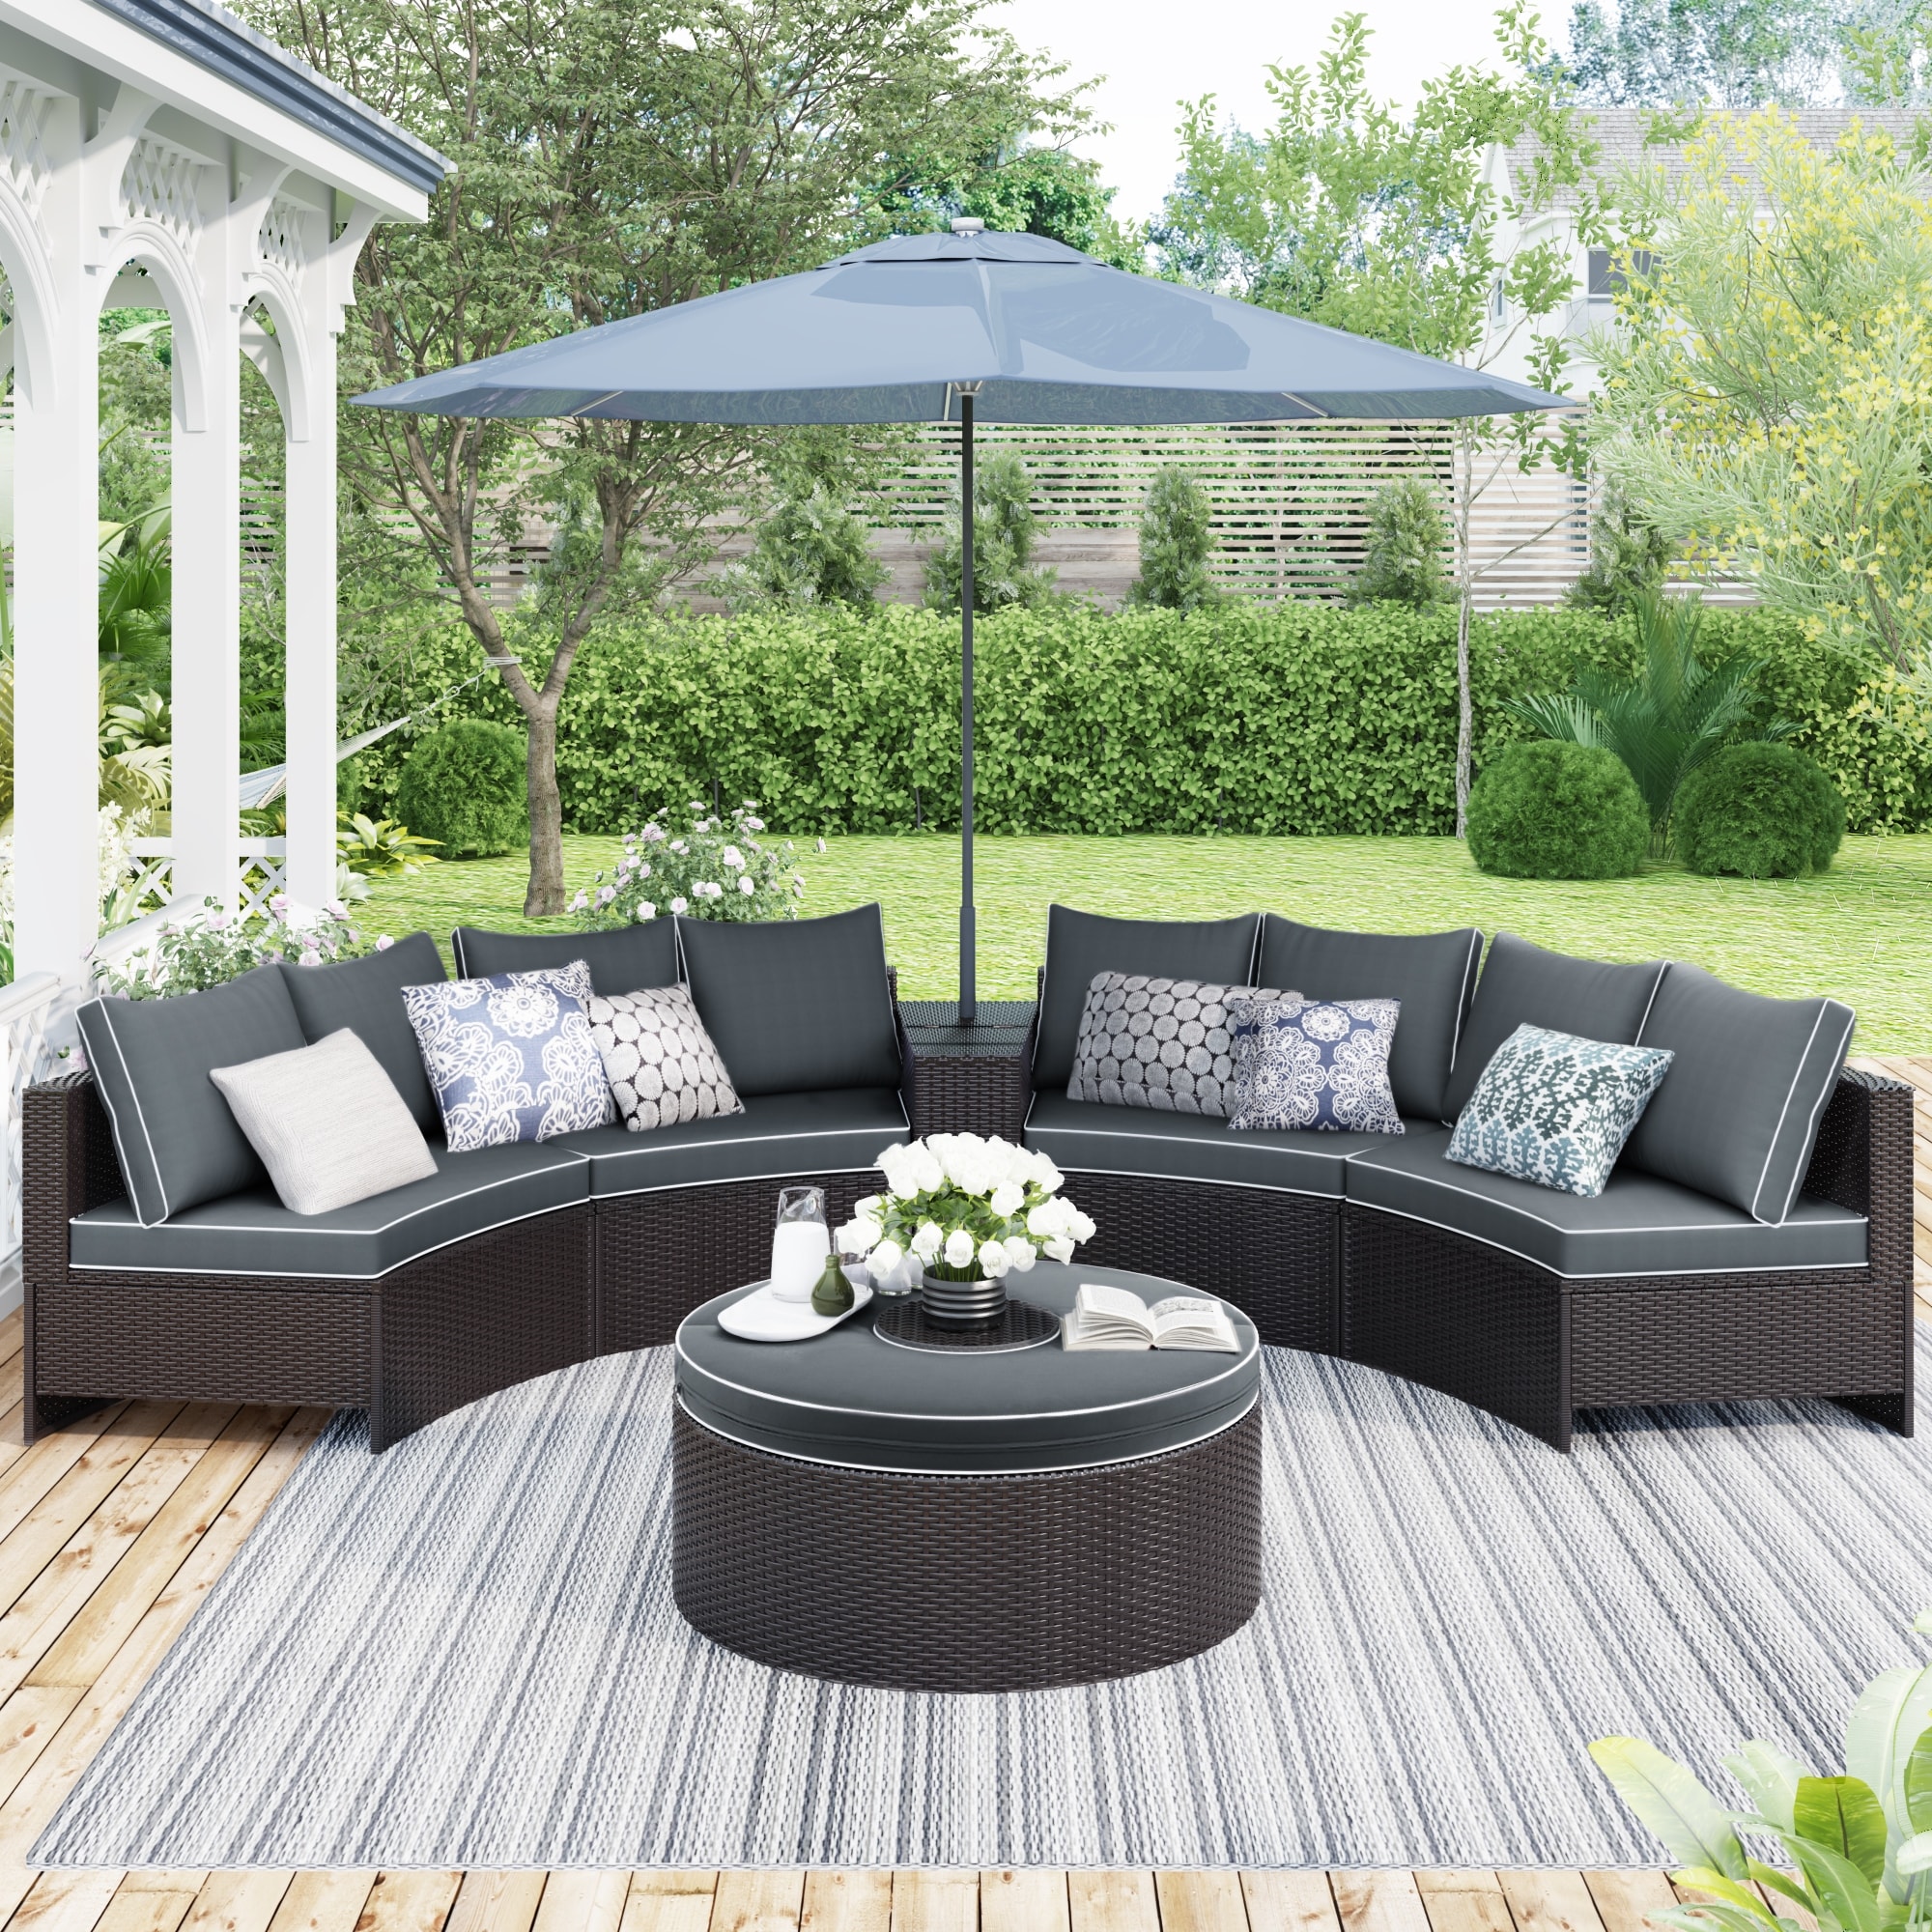 6-pieces Outdoor Rattan Patio Half Round Sofa Set  With An Umbrella Storage Side Table And A Multifunction Round Table